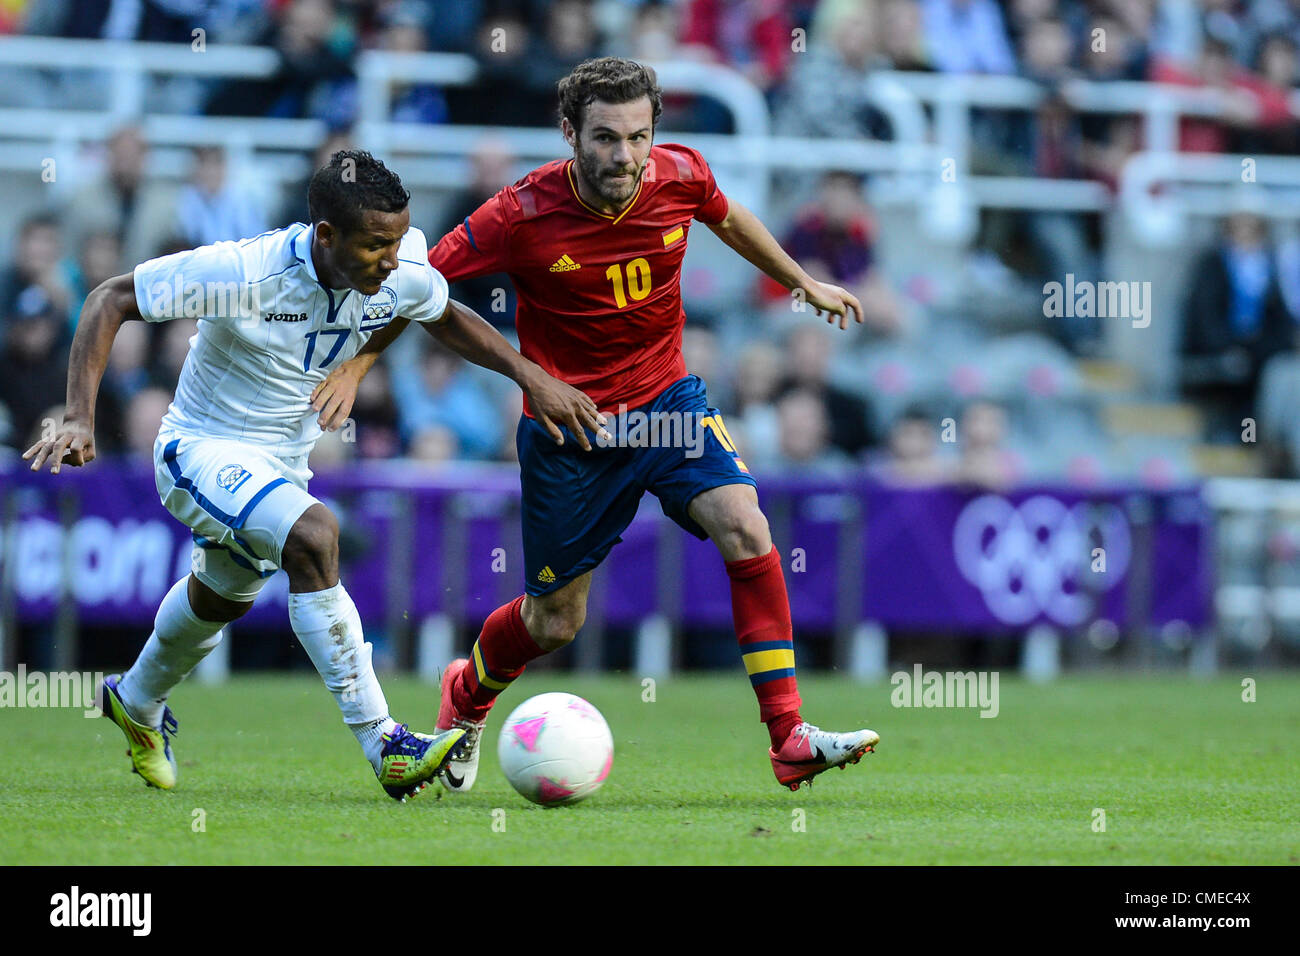 29.07.2012 Newcastle, England. Spain's Juan Mata and Luis Garrido from Honduras in action during the Olympic Football Men's Preliminary game between Spain and Honduras from St James Park. Stock Photo